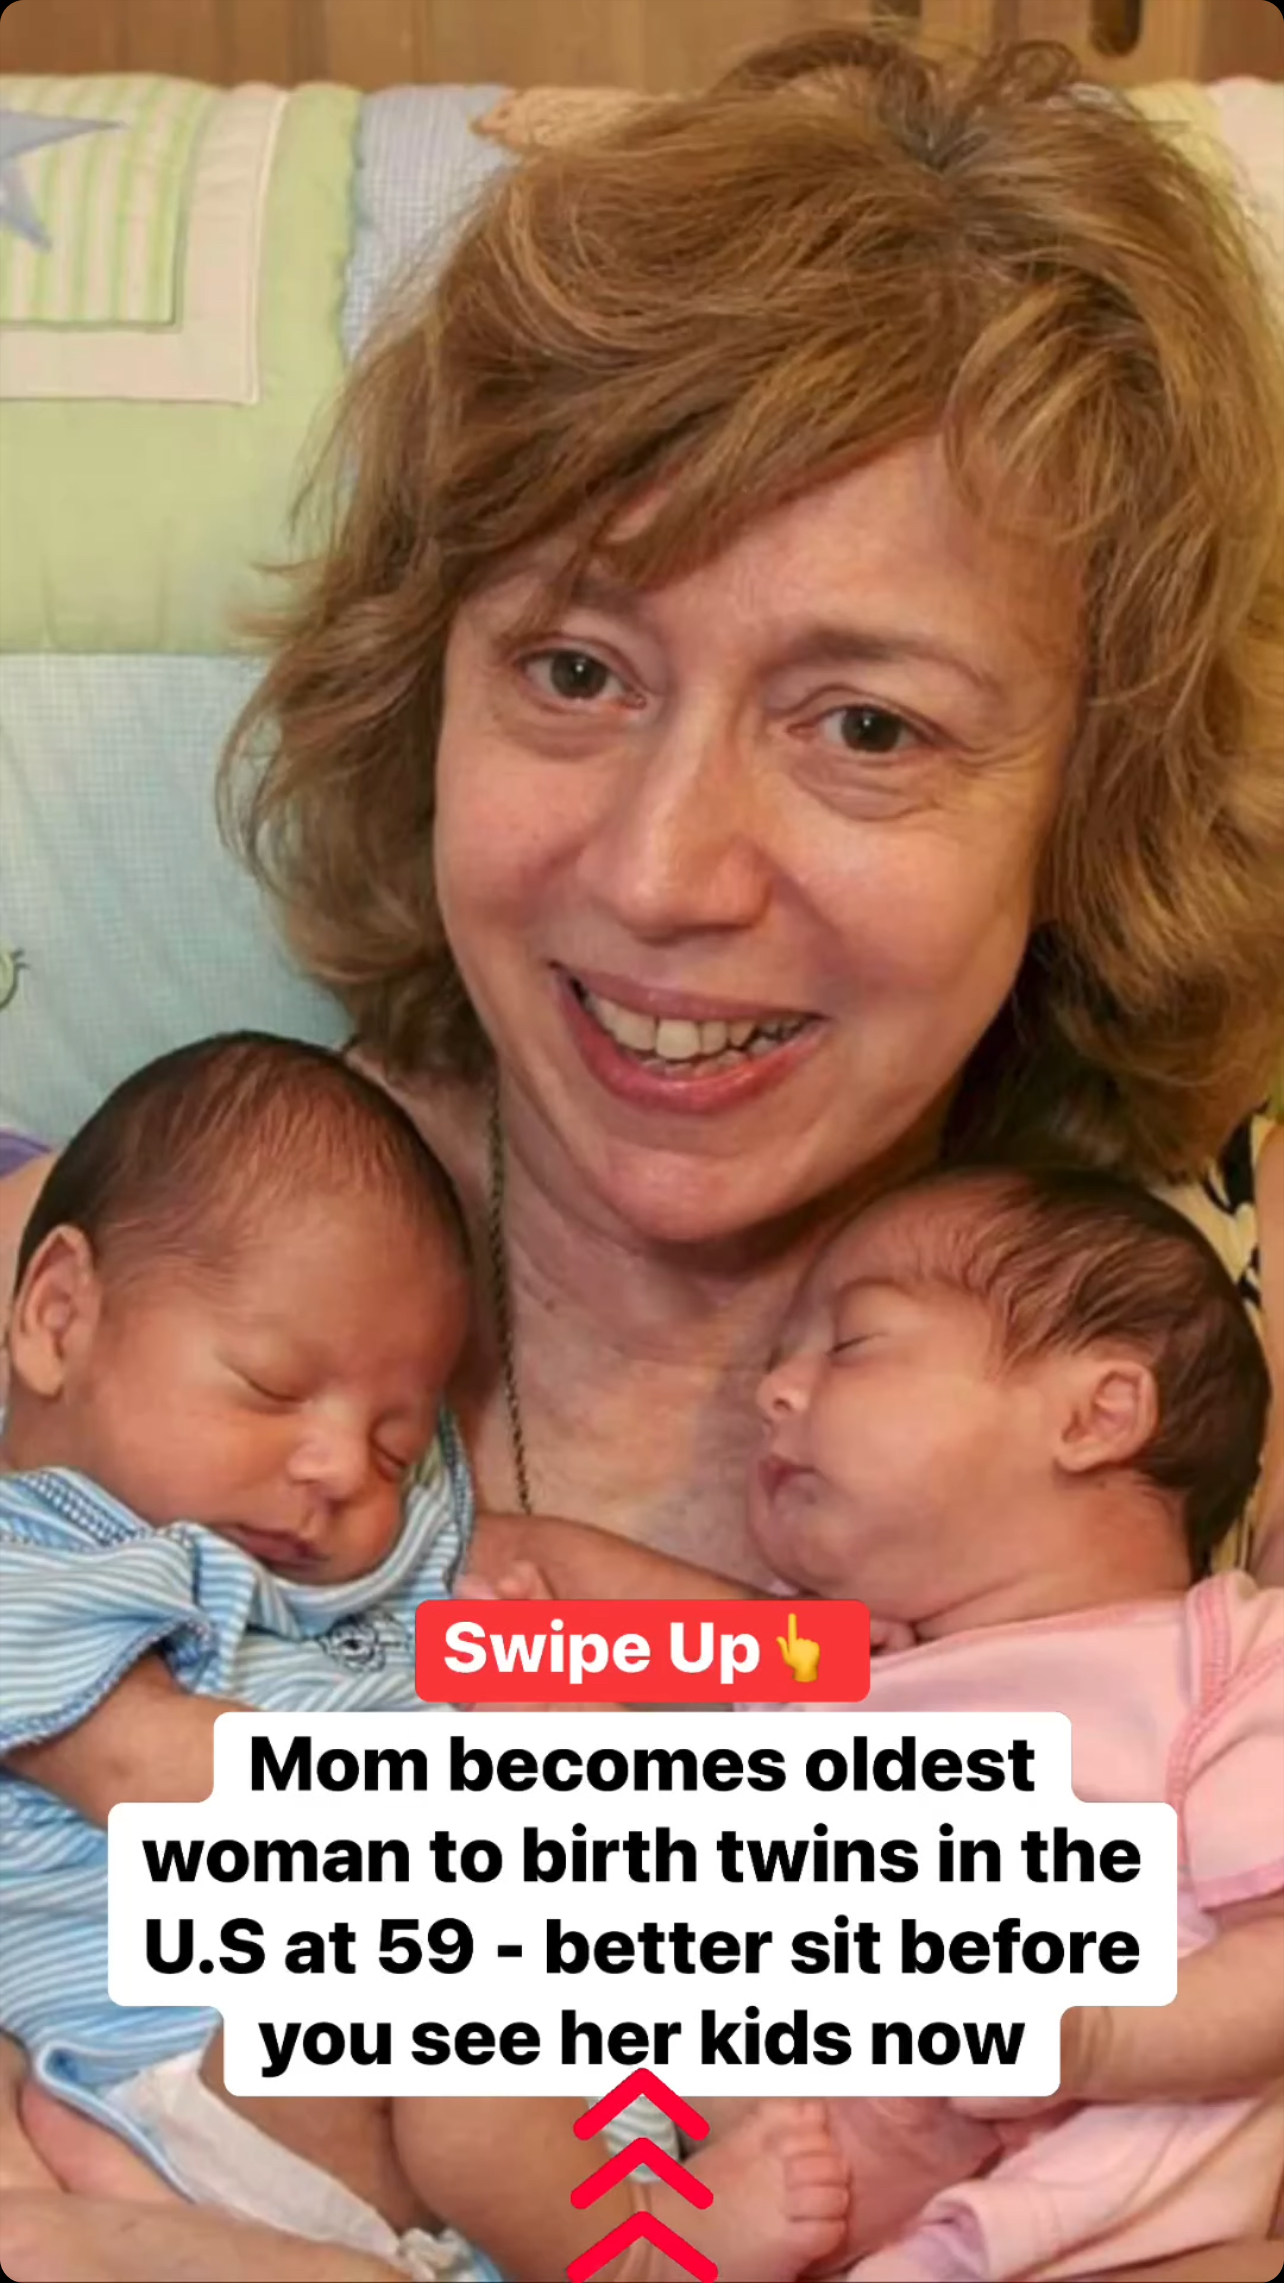 Mom Becomes Oldest Woman To Birth Twins In The U.S. But Wait Till You See Her Kids Today - Latest news!